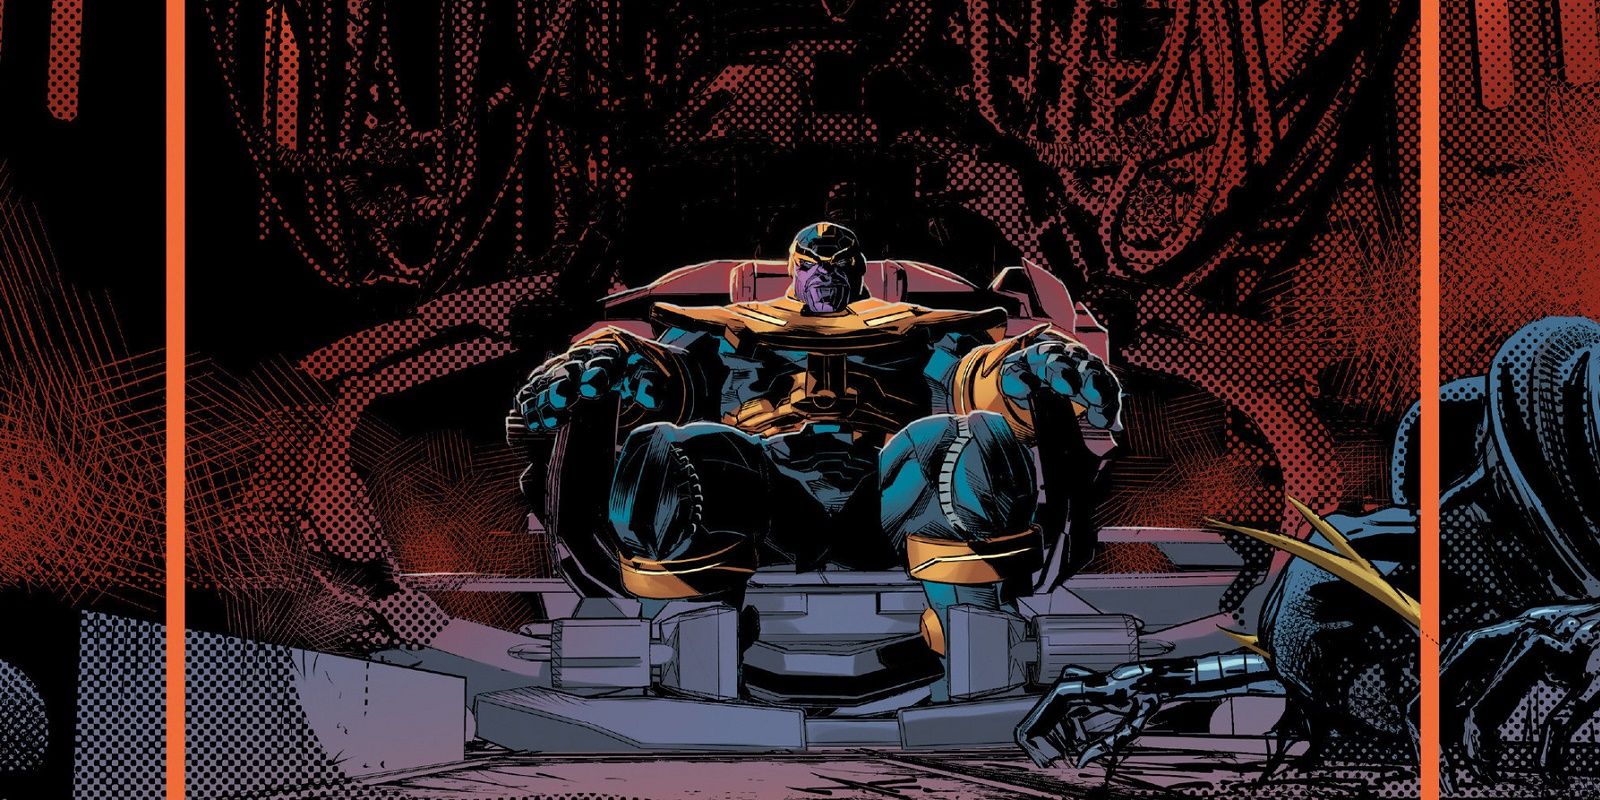 Is Thanos The Mad Titan Dying?